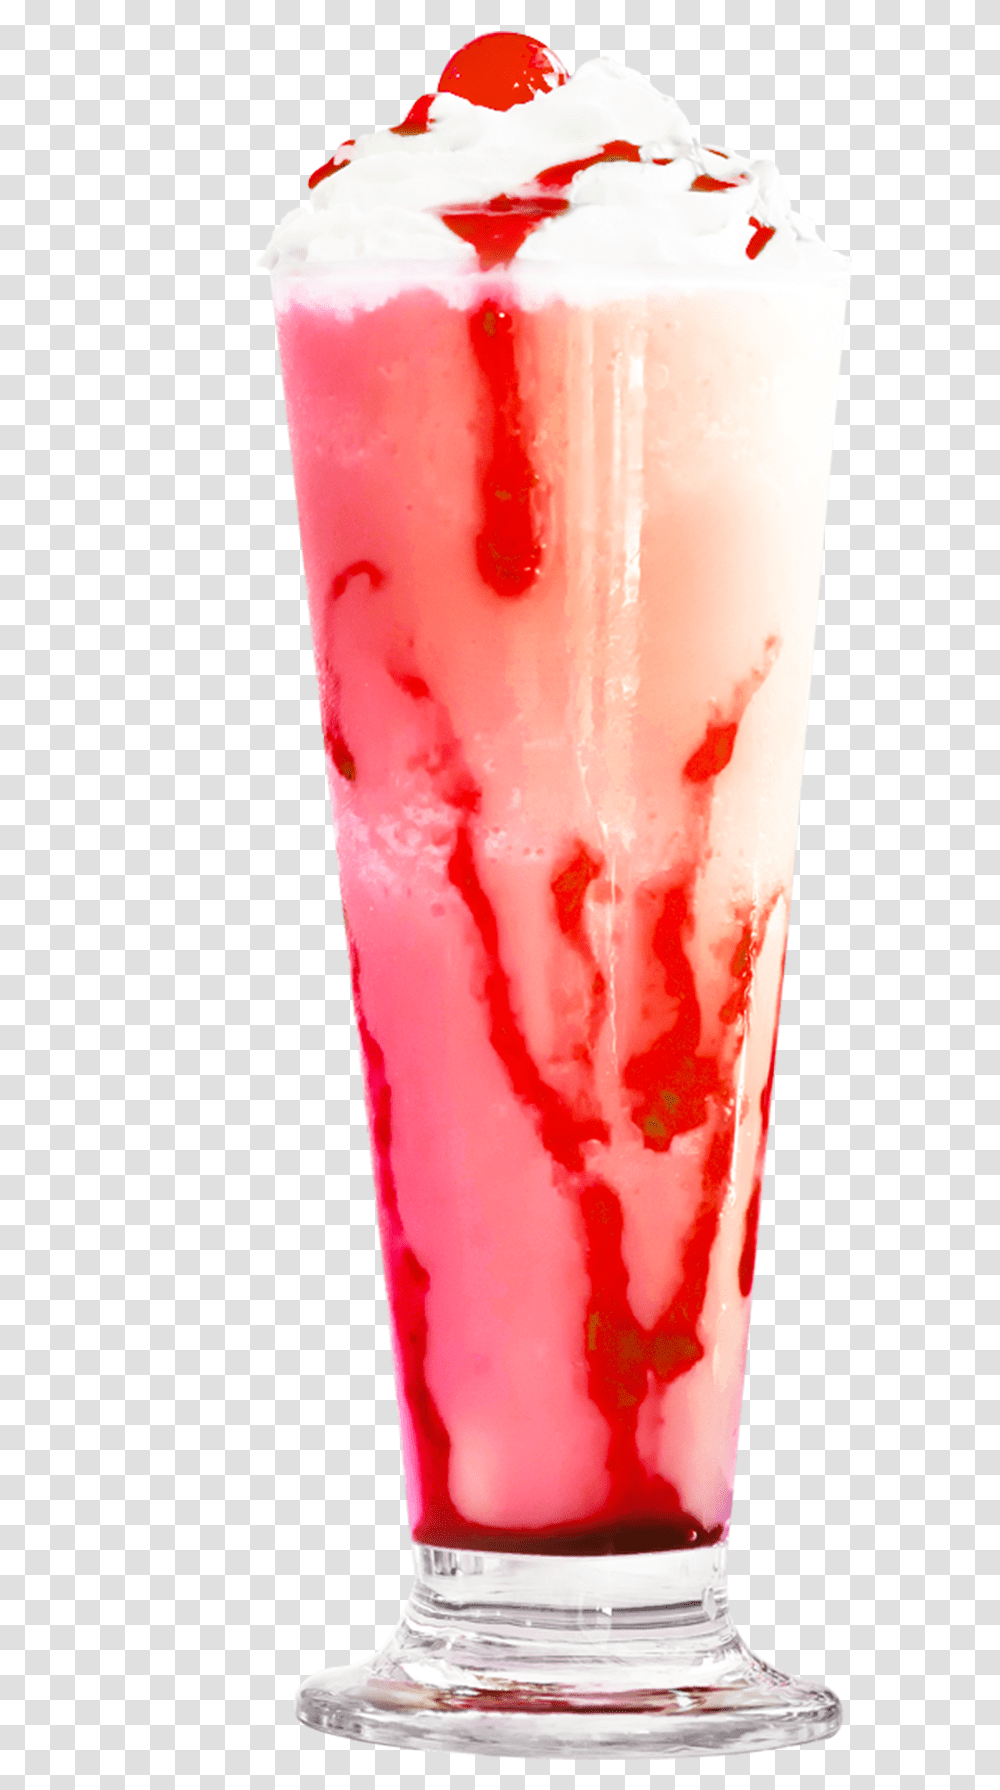 Ice Cream Milk Shake Image Free Juice And Smoothies, Cocktail, Alcohol, Beverage, Plant Transparent Png